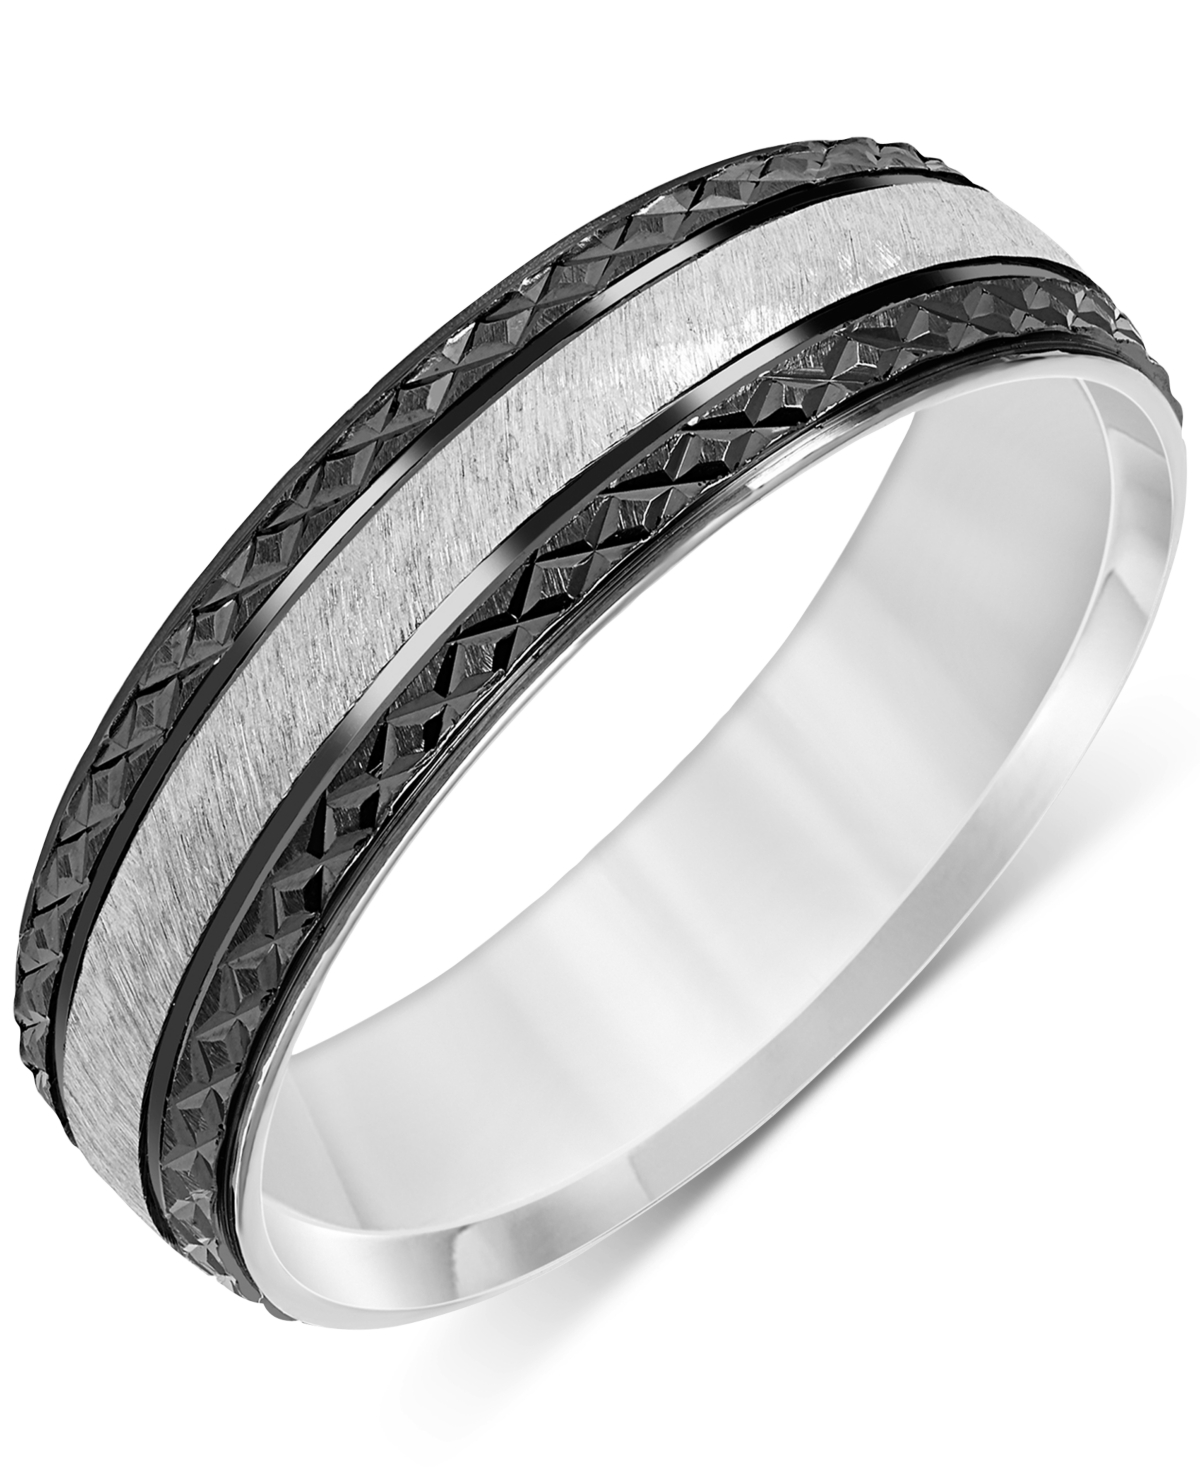 Macy's Men's Carved Two-tone Wedding Band In Sterling Silver & Black Rhodium-plate